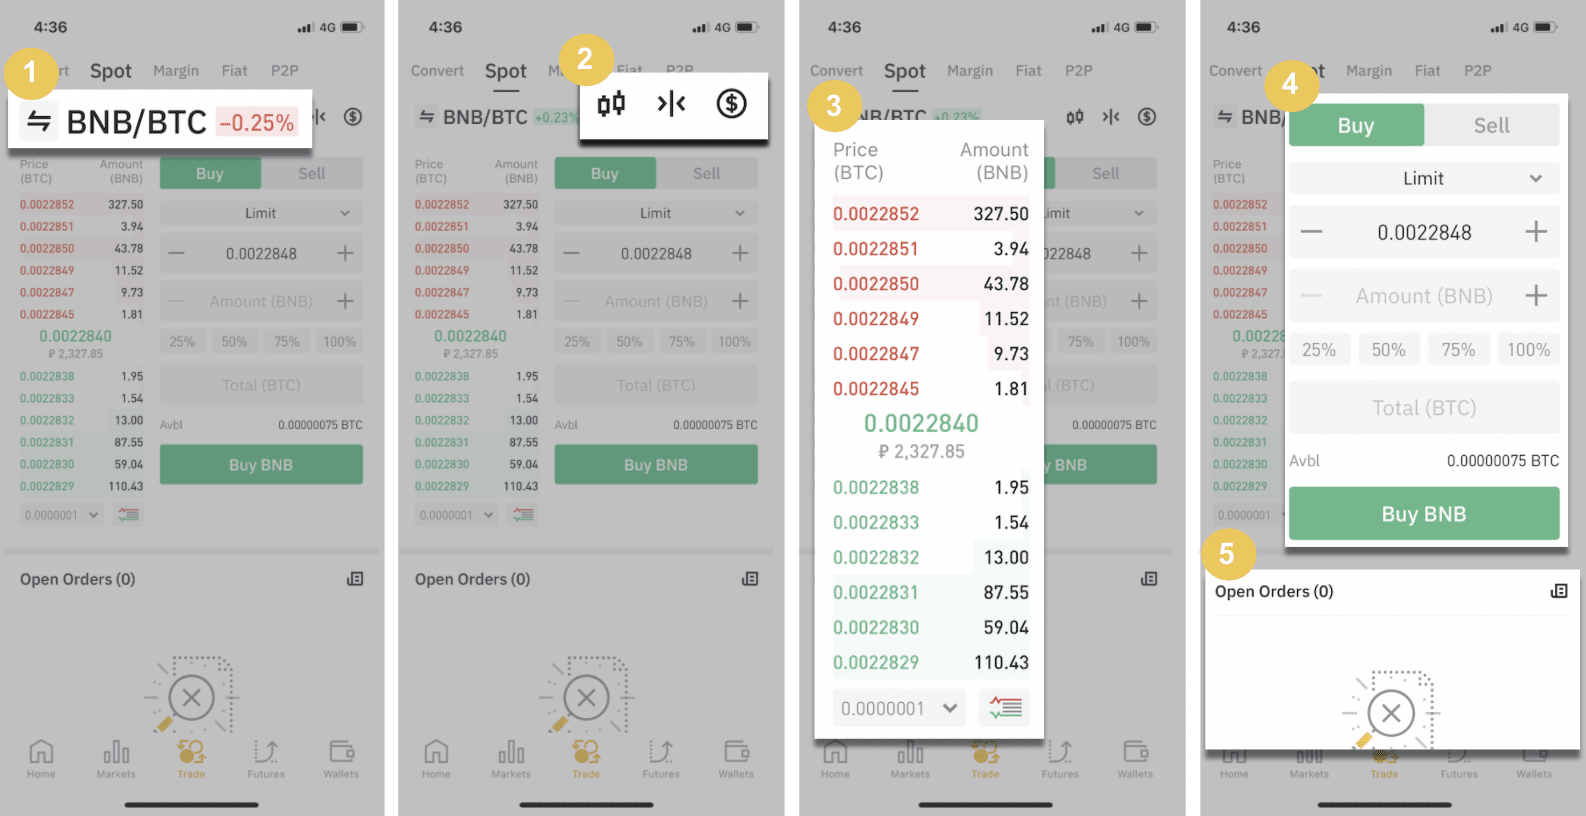 How to Register and Trade Crypto at Binance